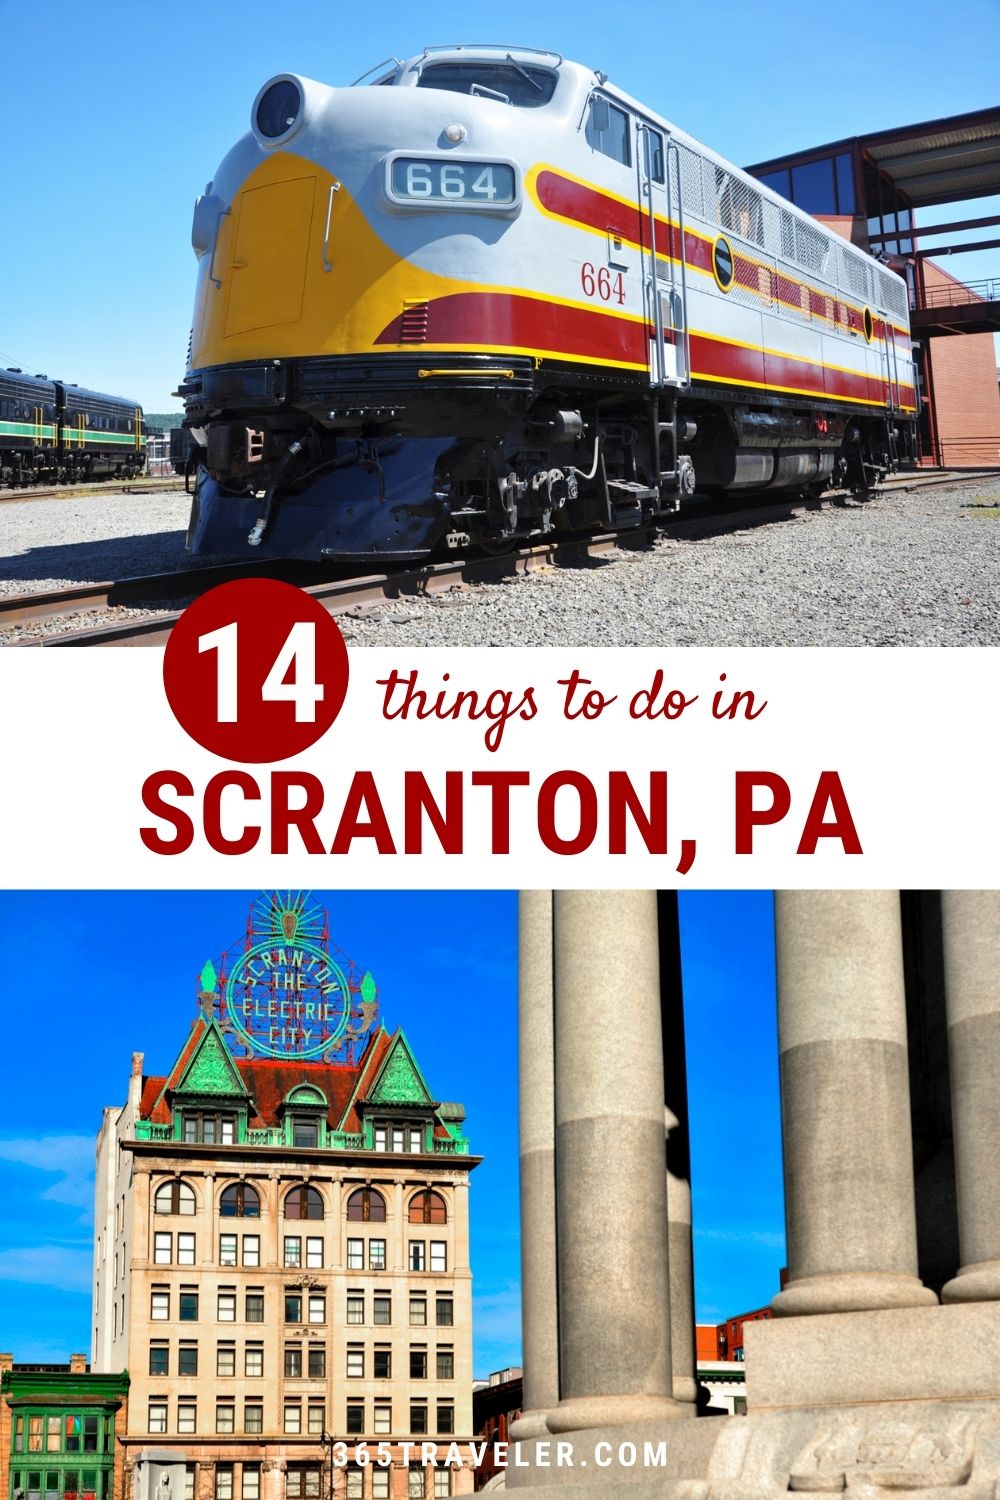 14 FUN THINGS TO DO IN SCRANTON PA YOU CAN'T MISS